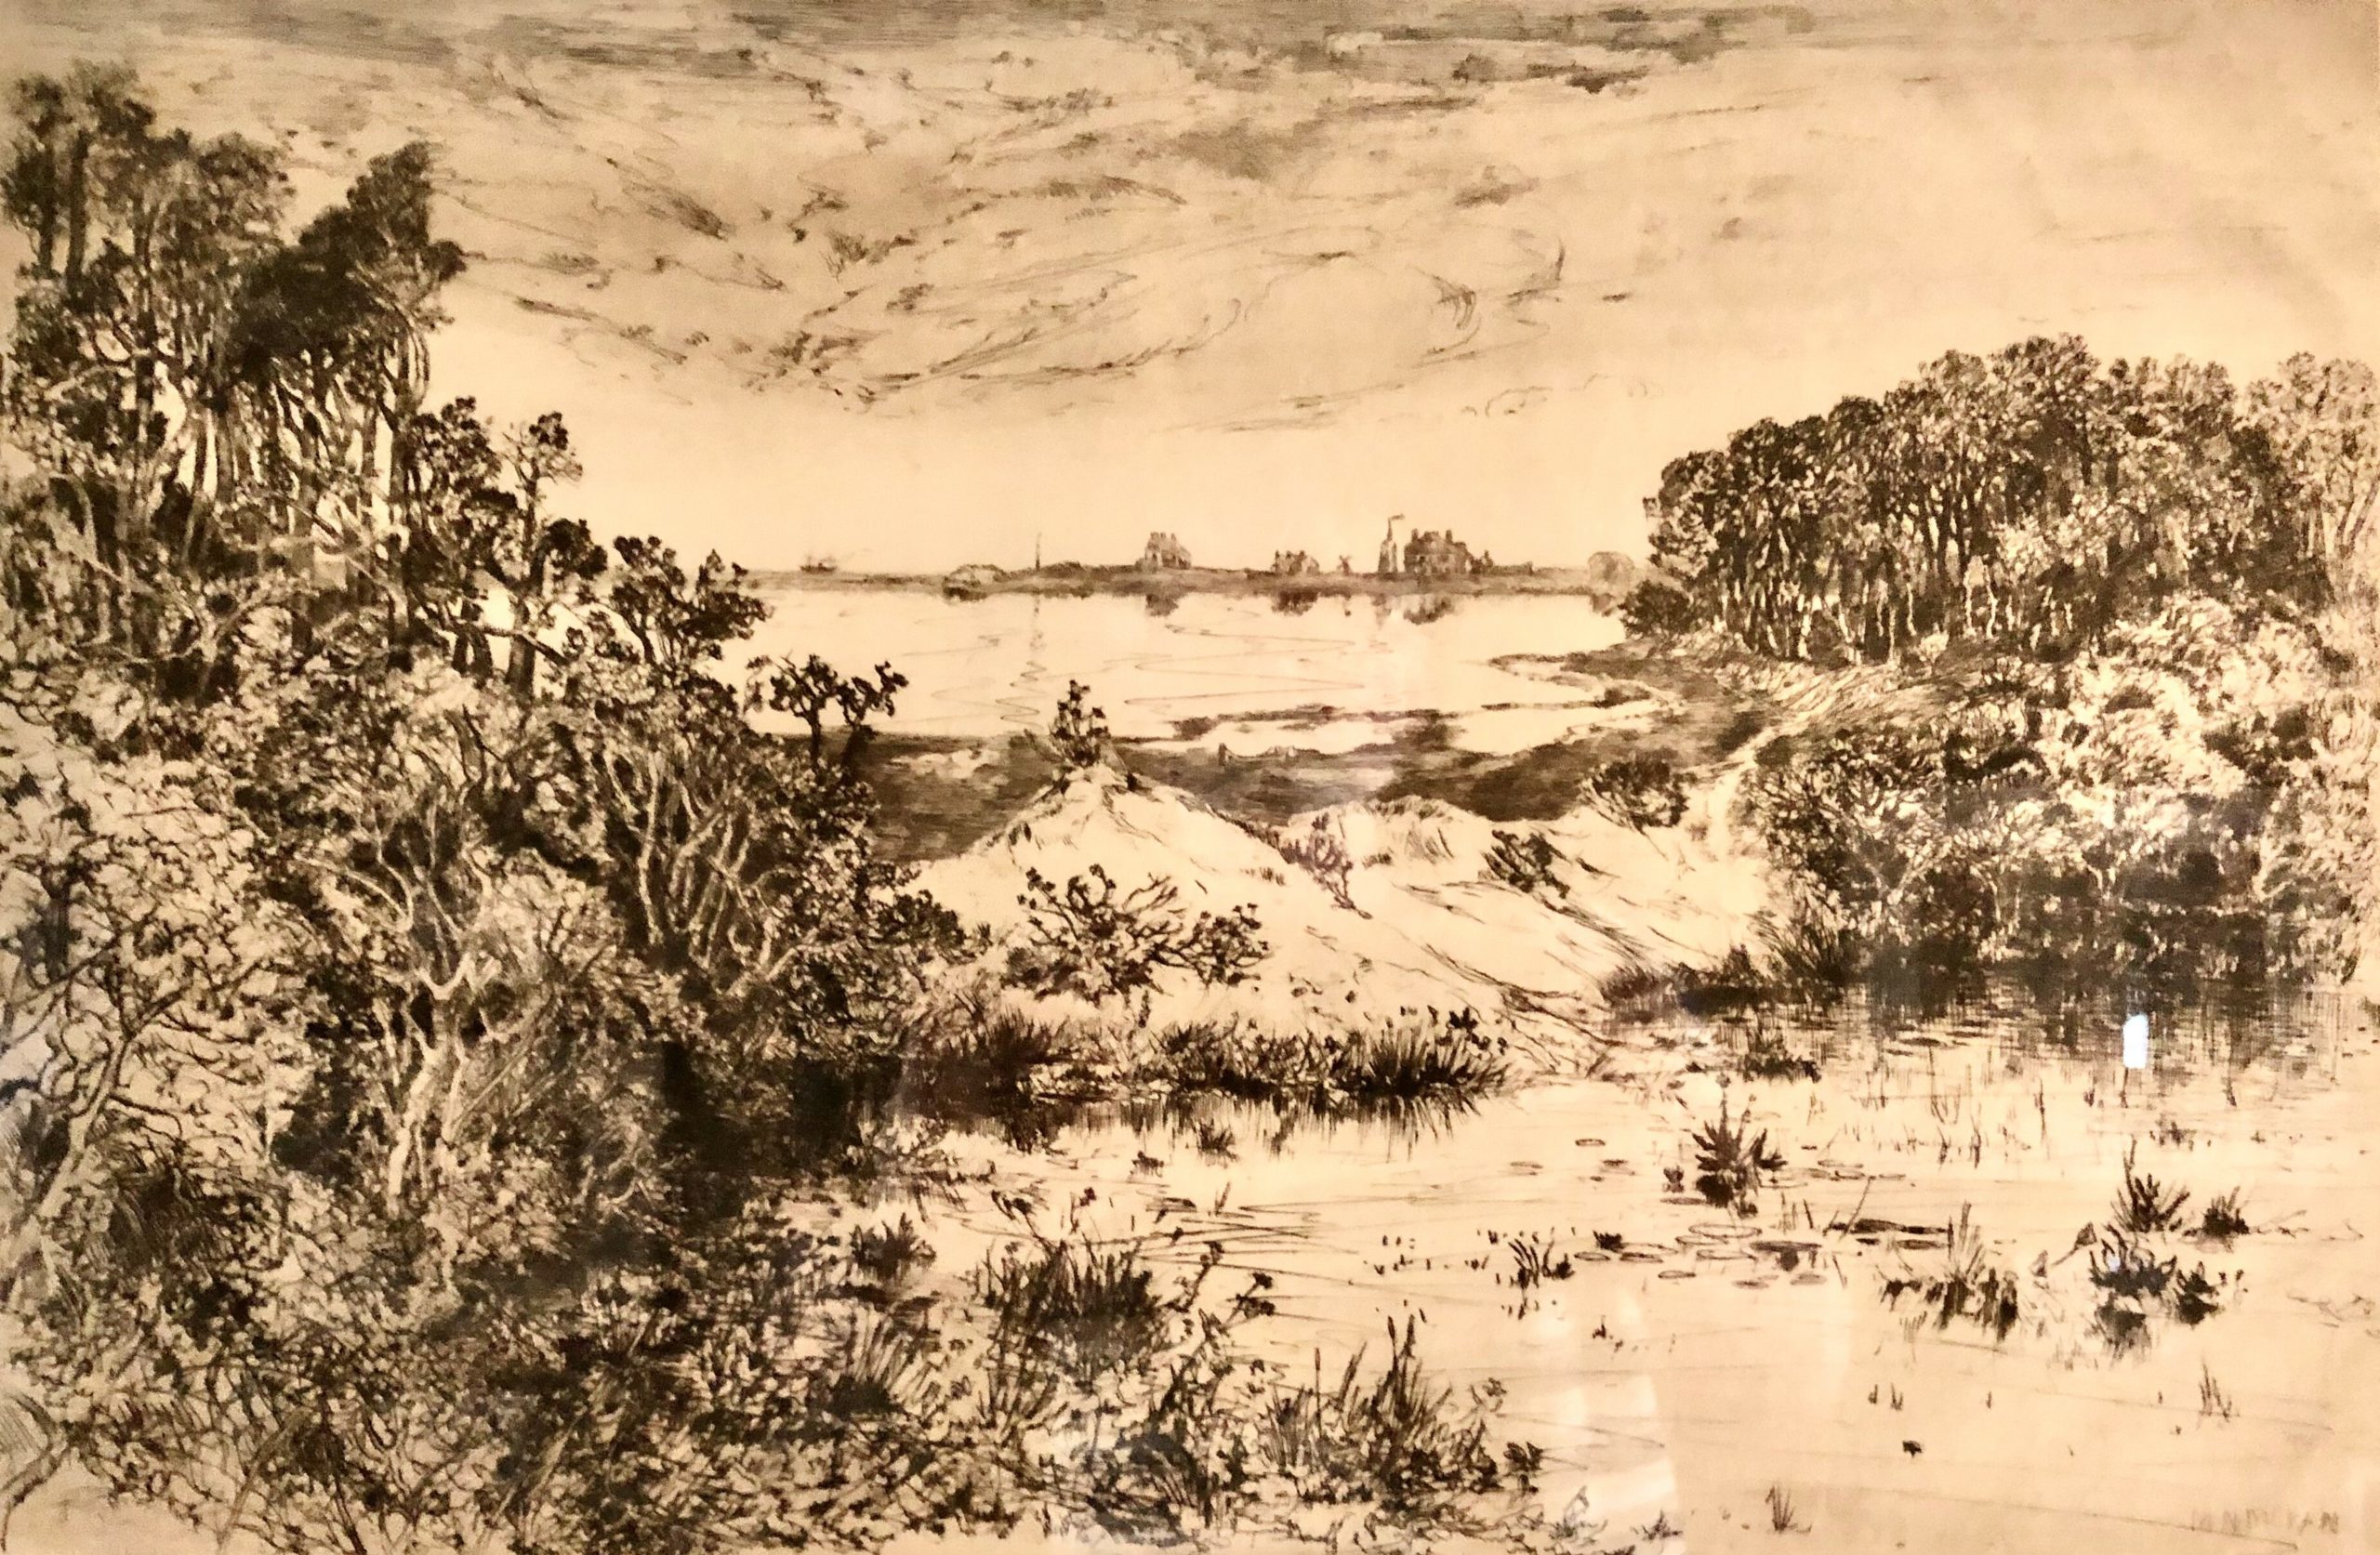 Mary Nimmo Moran, “Georgica Pond Looking Seaward” 1885, etching on paper, East Hampton Library, Thomas Moran Biographical Collection.